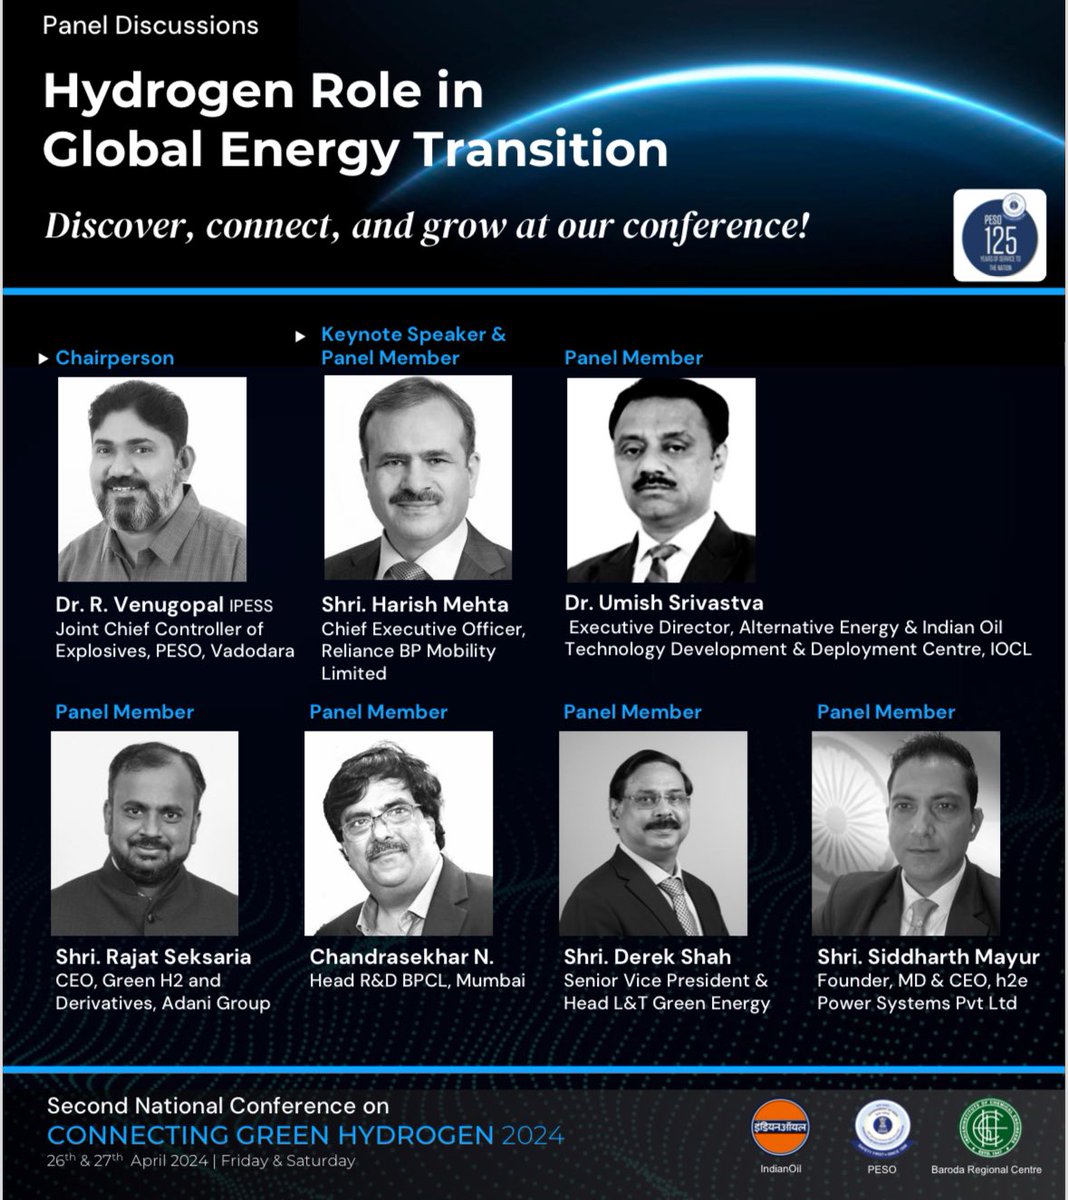 Honored to be invited as a Panel Member to discuss Hydrogen’s role in Energy Transition at the 2nd National Conference on Connecting Green Hydrogen #CGH2024 to be held in Vadodara on April 26th & 27. I am looking forward to gaining valuable insights from Industry, Academia &